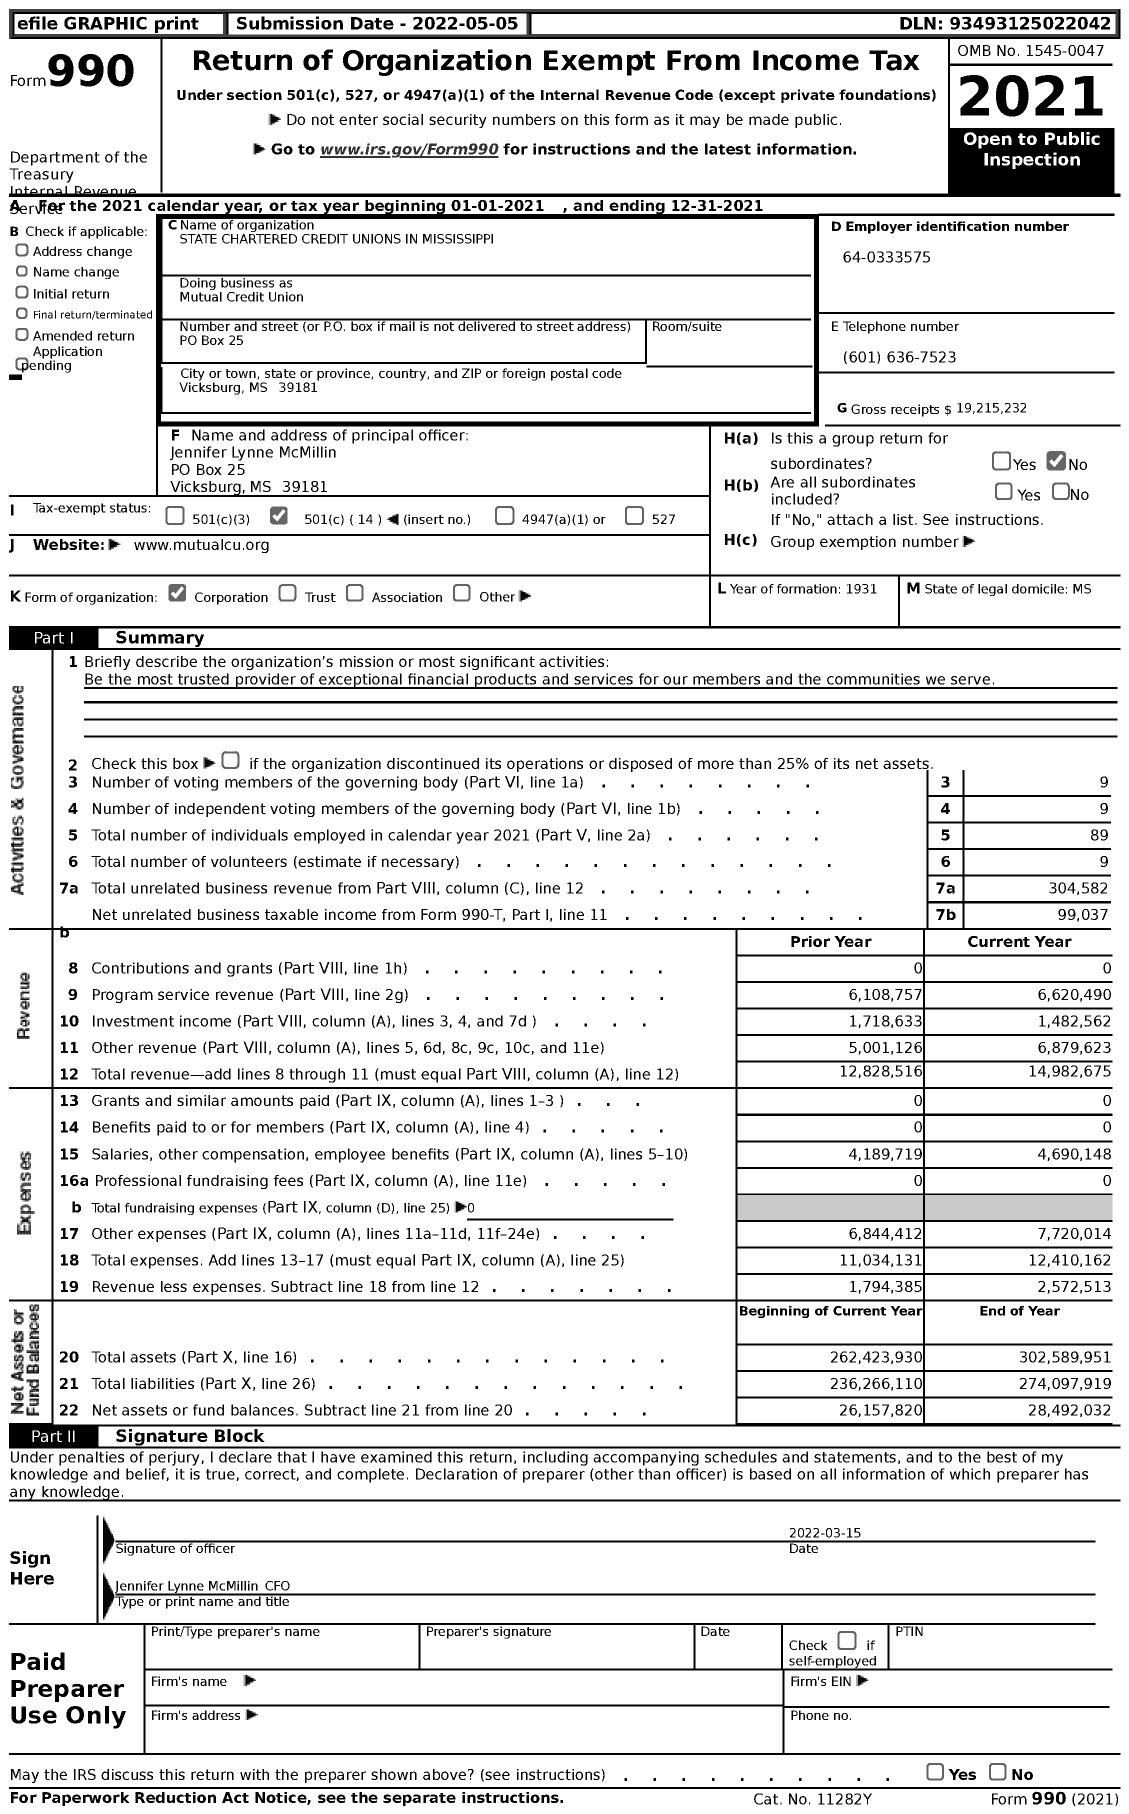 Image of first page of 2021 Form 990 for Mutual Credit Union (MCU)